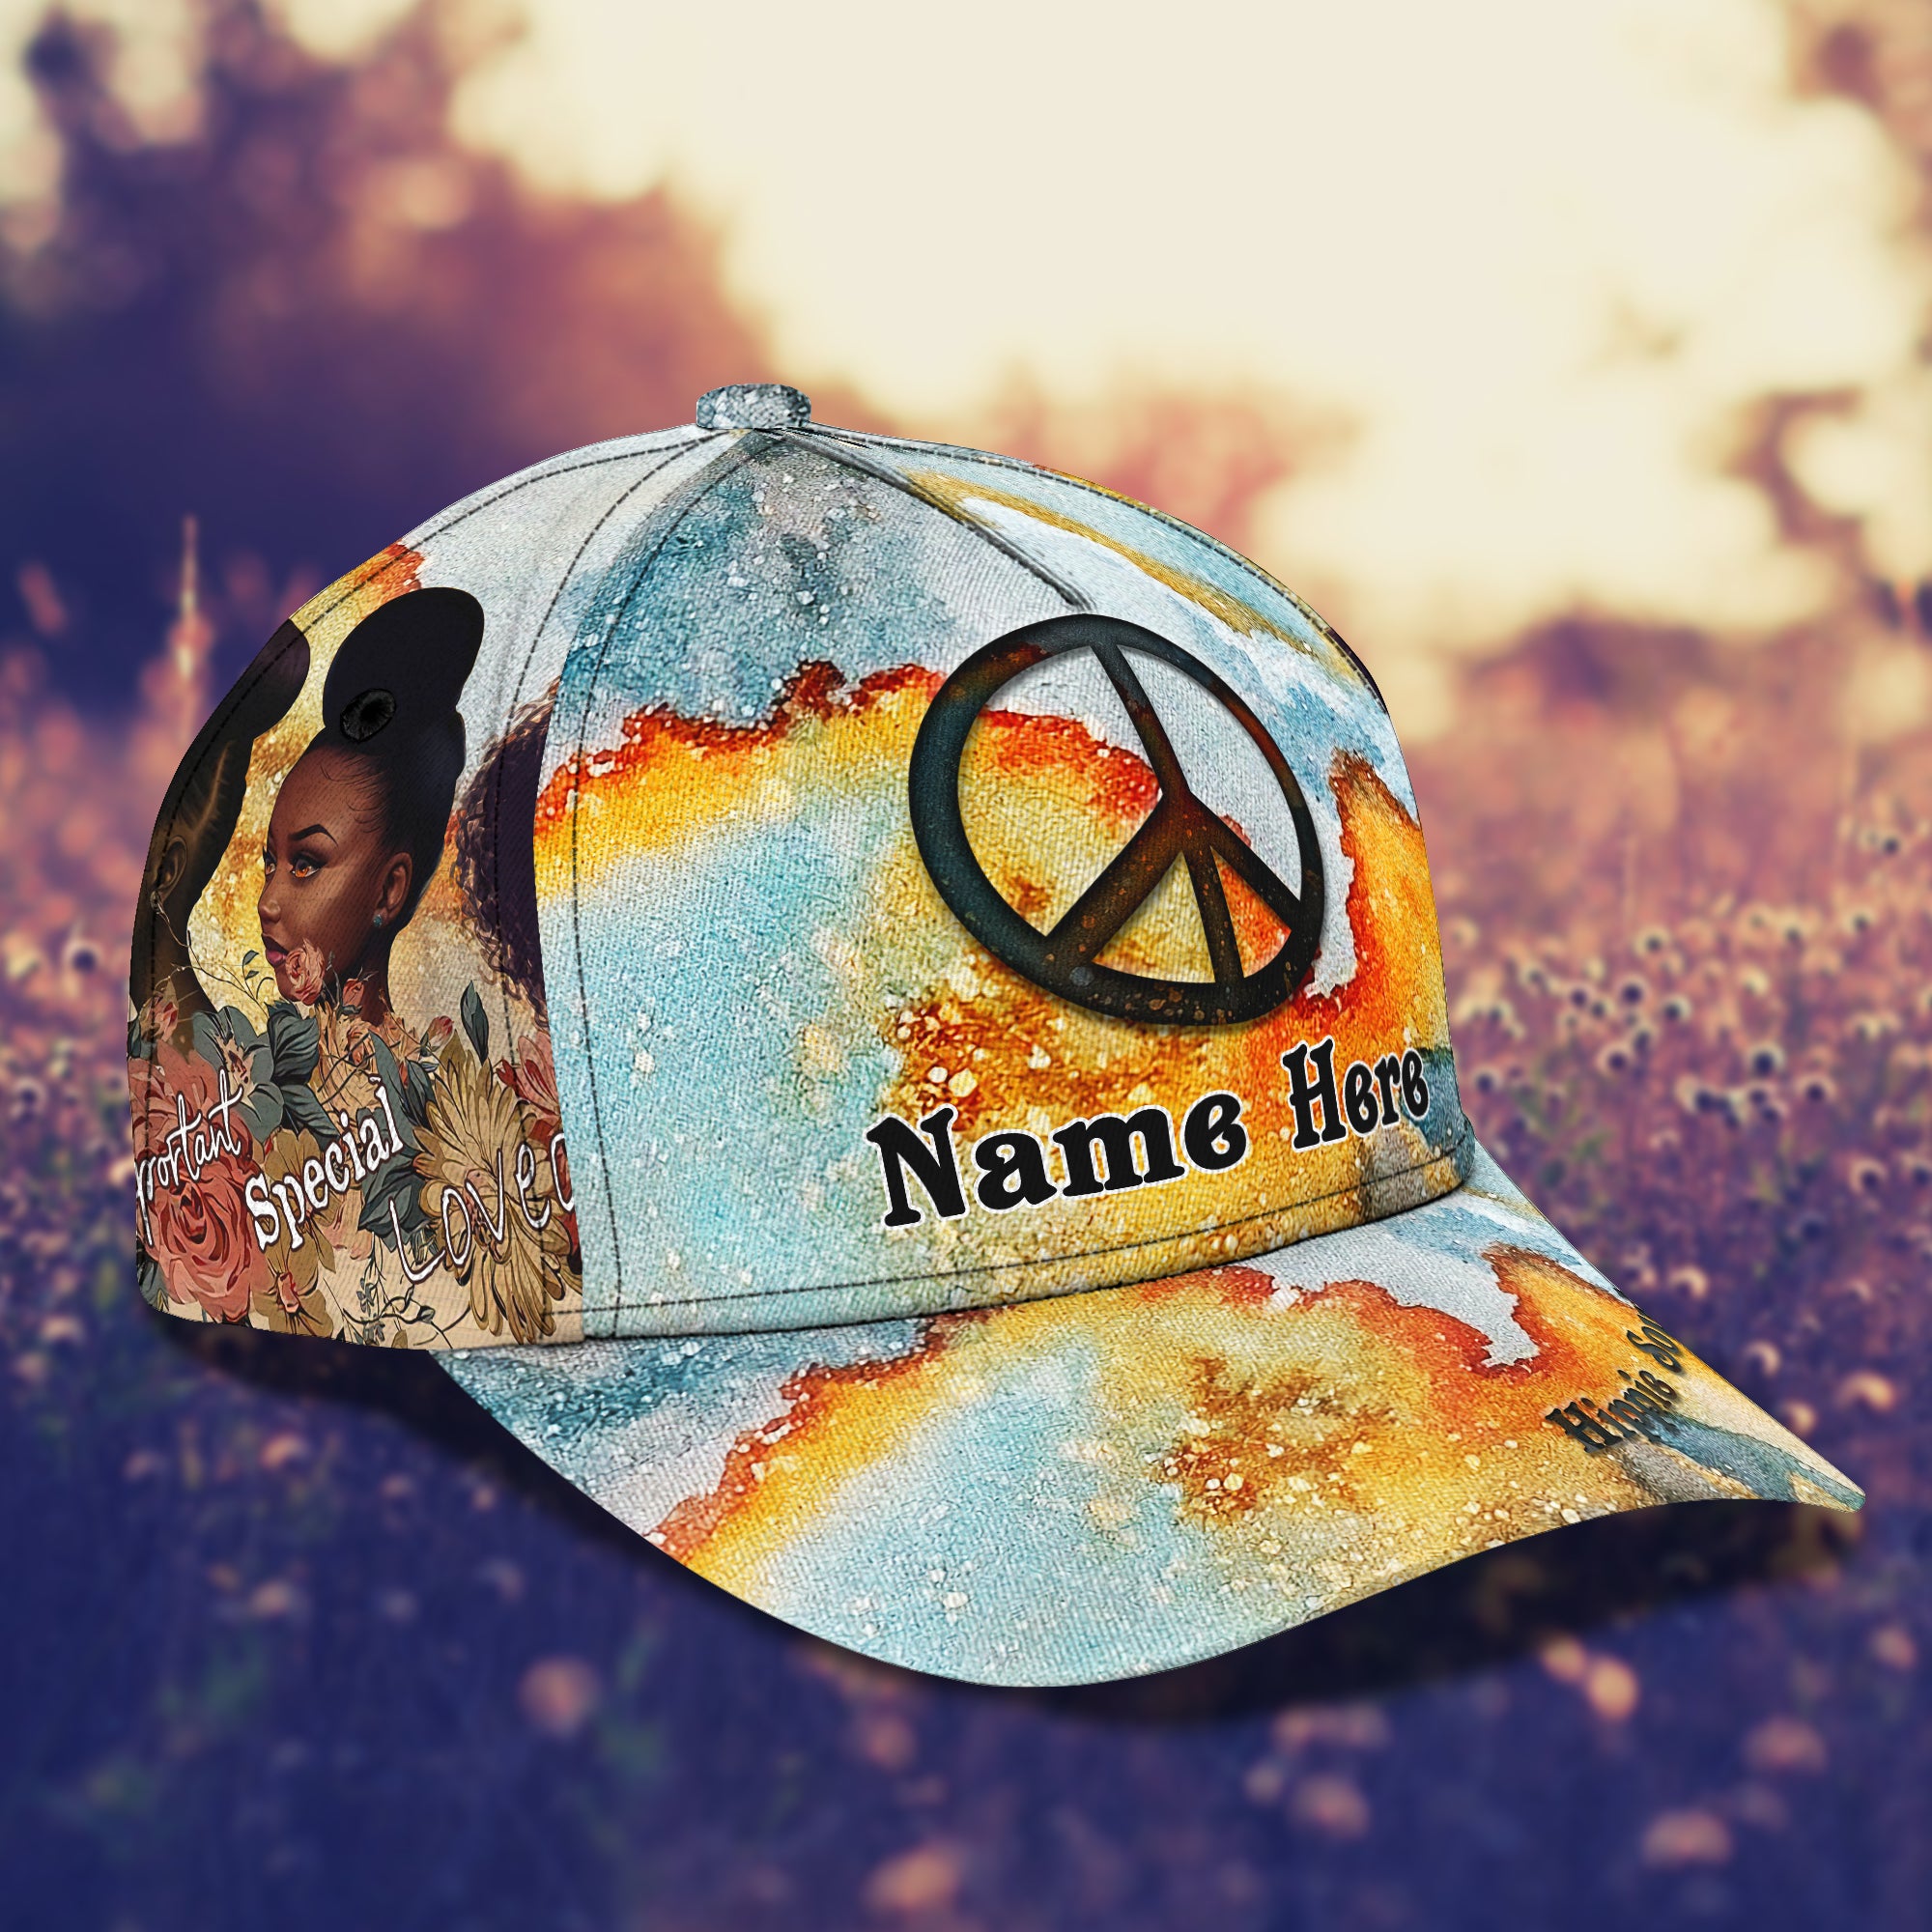 Hippie 01 - Personalized Name Cap - 16hb